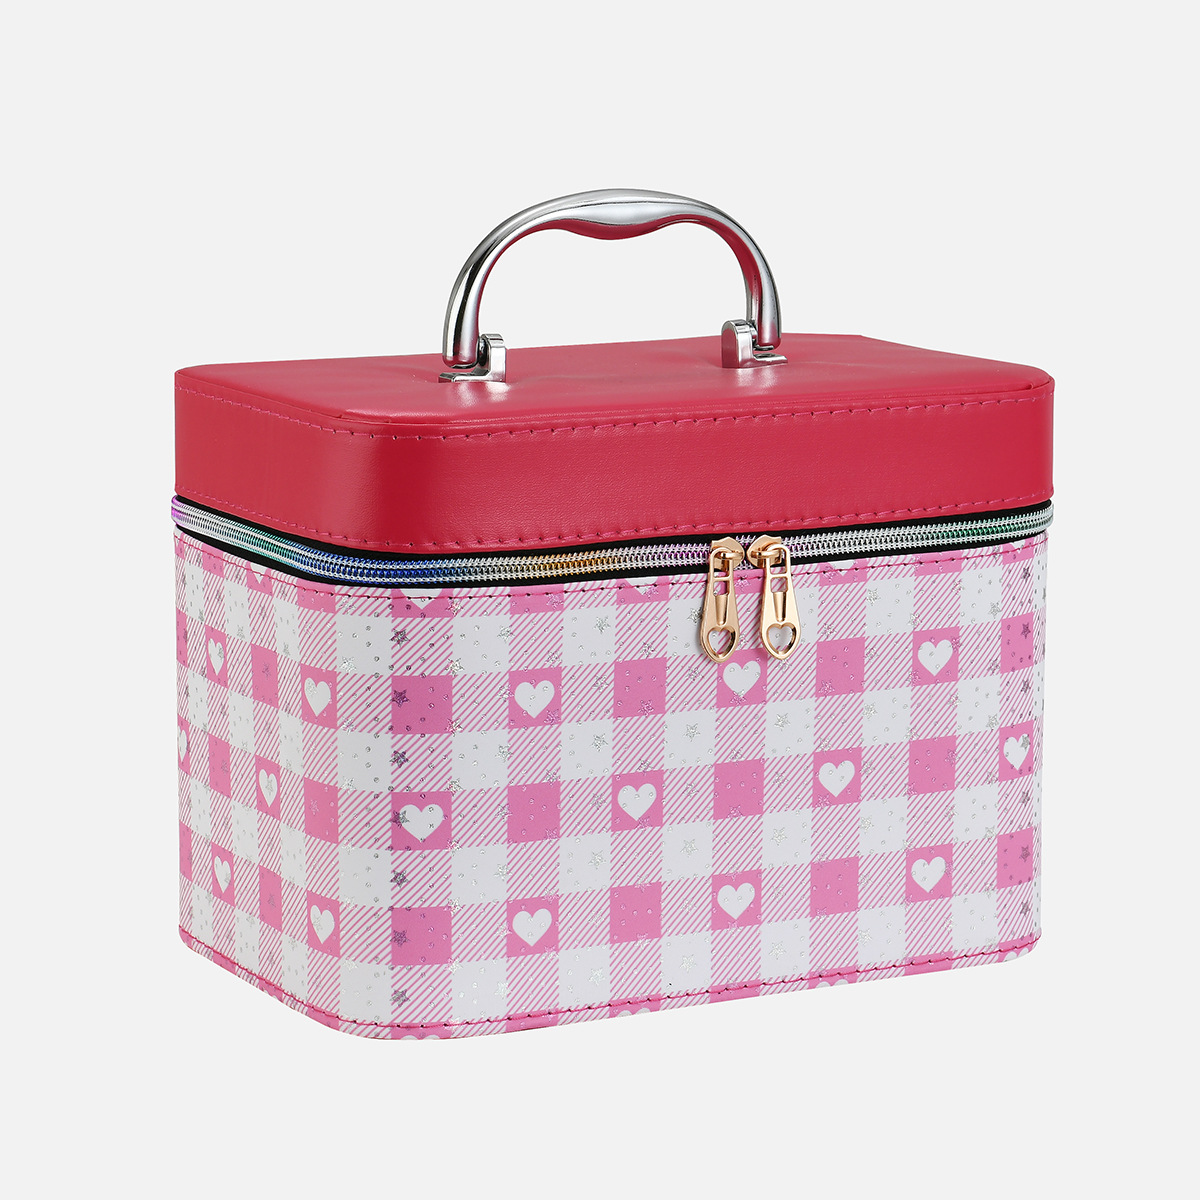 New Korean Version of Chanel's Style Plaid Cosmetic Case Online Influencer Fashion Cosmetic Storage Box Travel Household Portable Portable